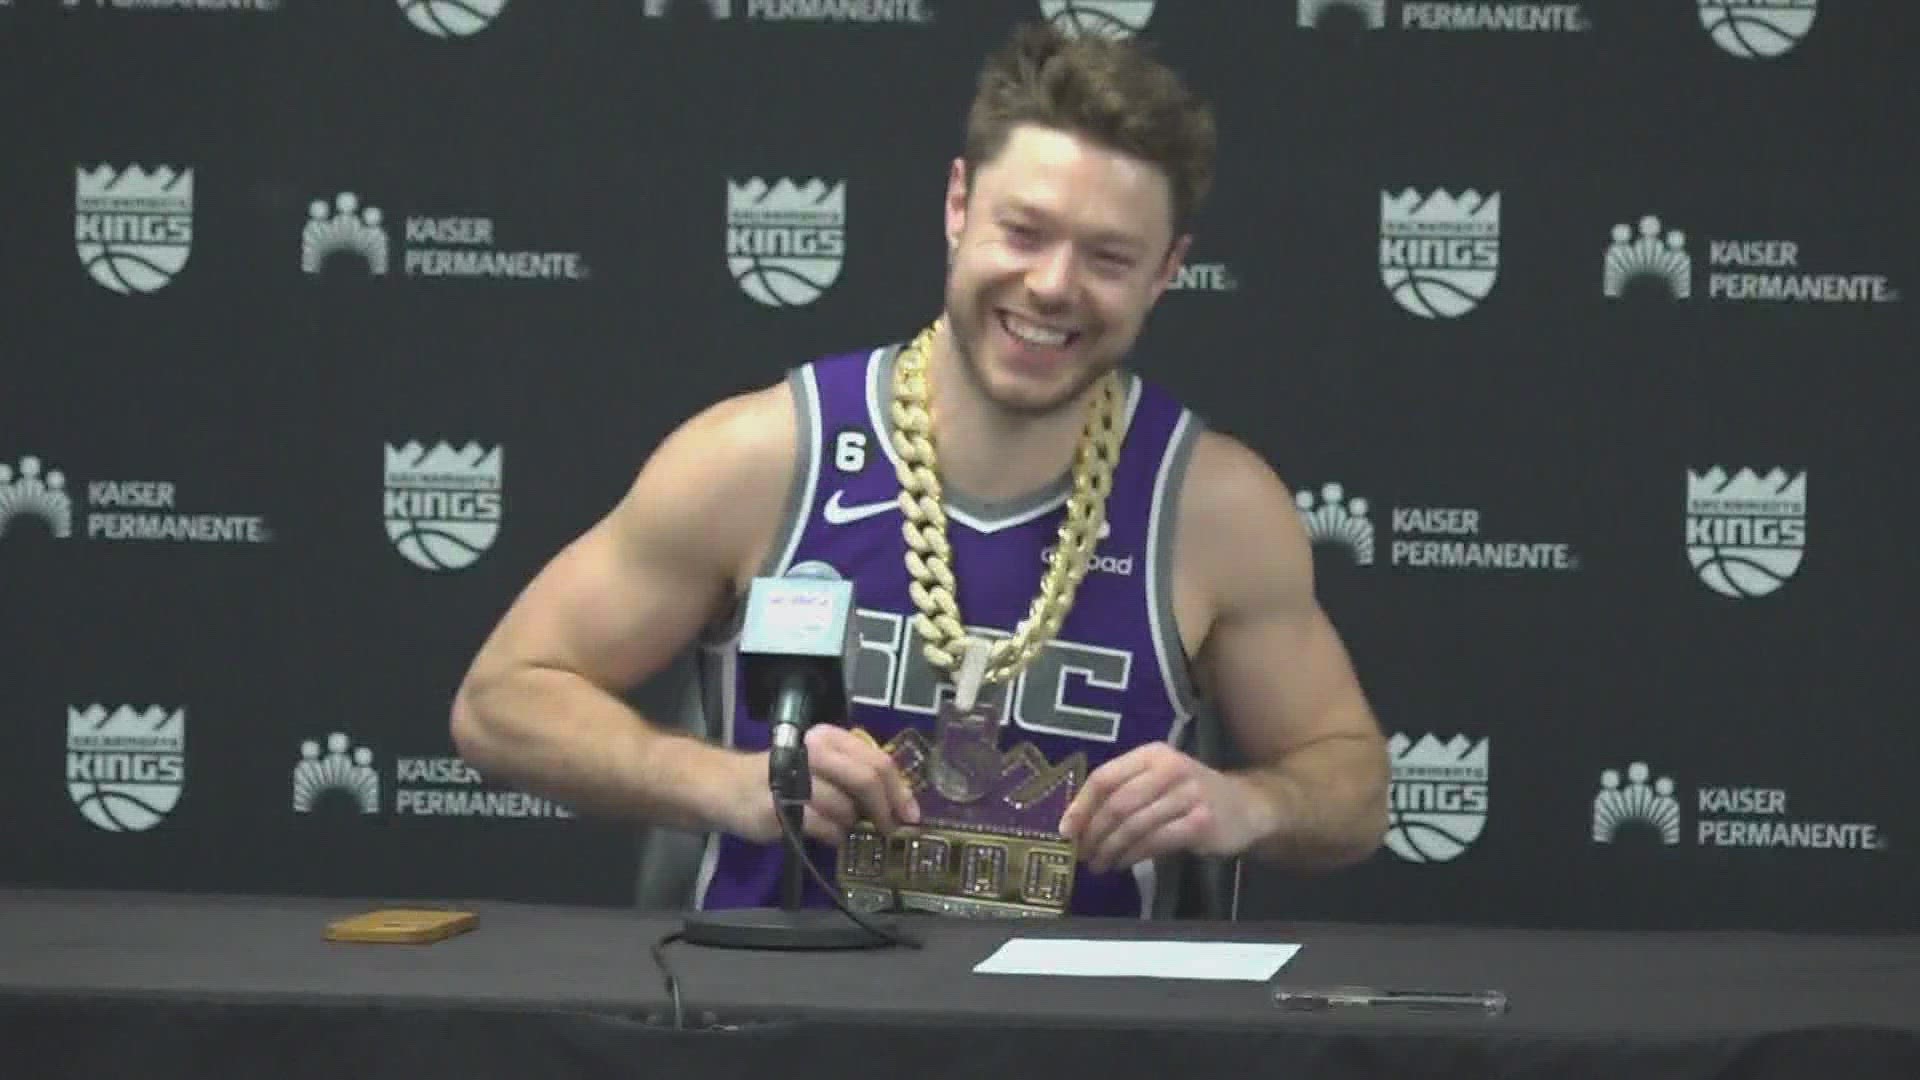 Matthew Dellavedova talks about the Sacramento Kings win against Utah Jazz and being one win away from the playoffs. 
#sacramento #MatthewDellavedova #sacking